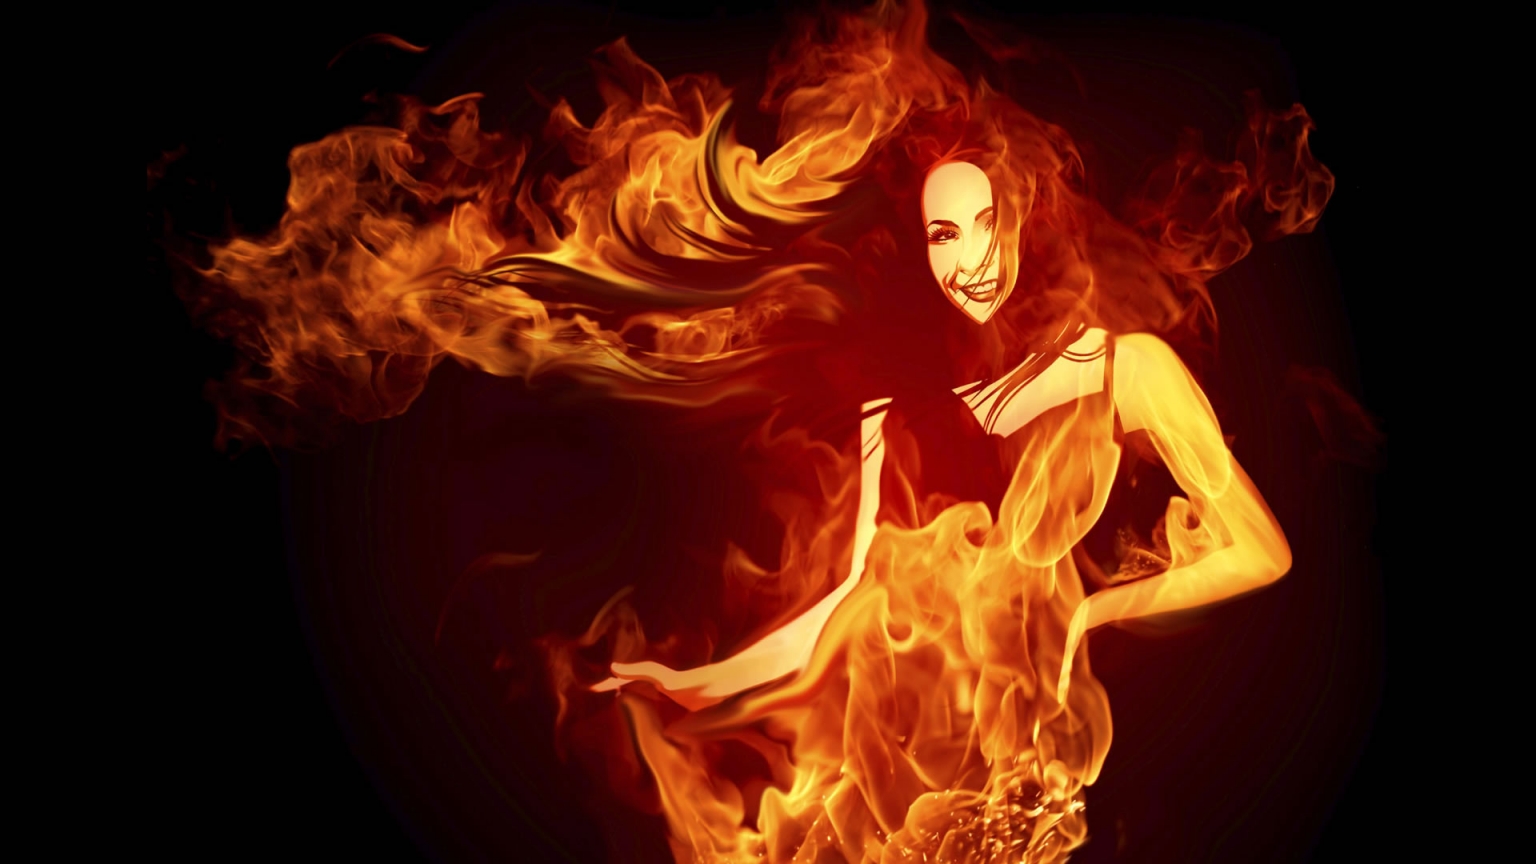 Woman in Fire for 1536 x 864 HDTV resolution